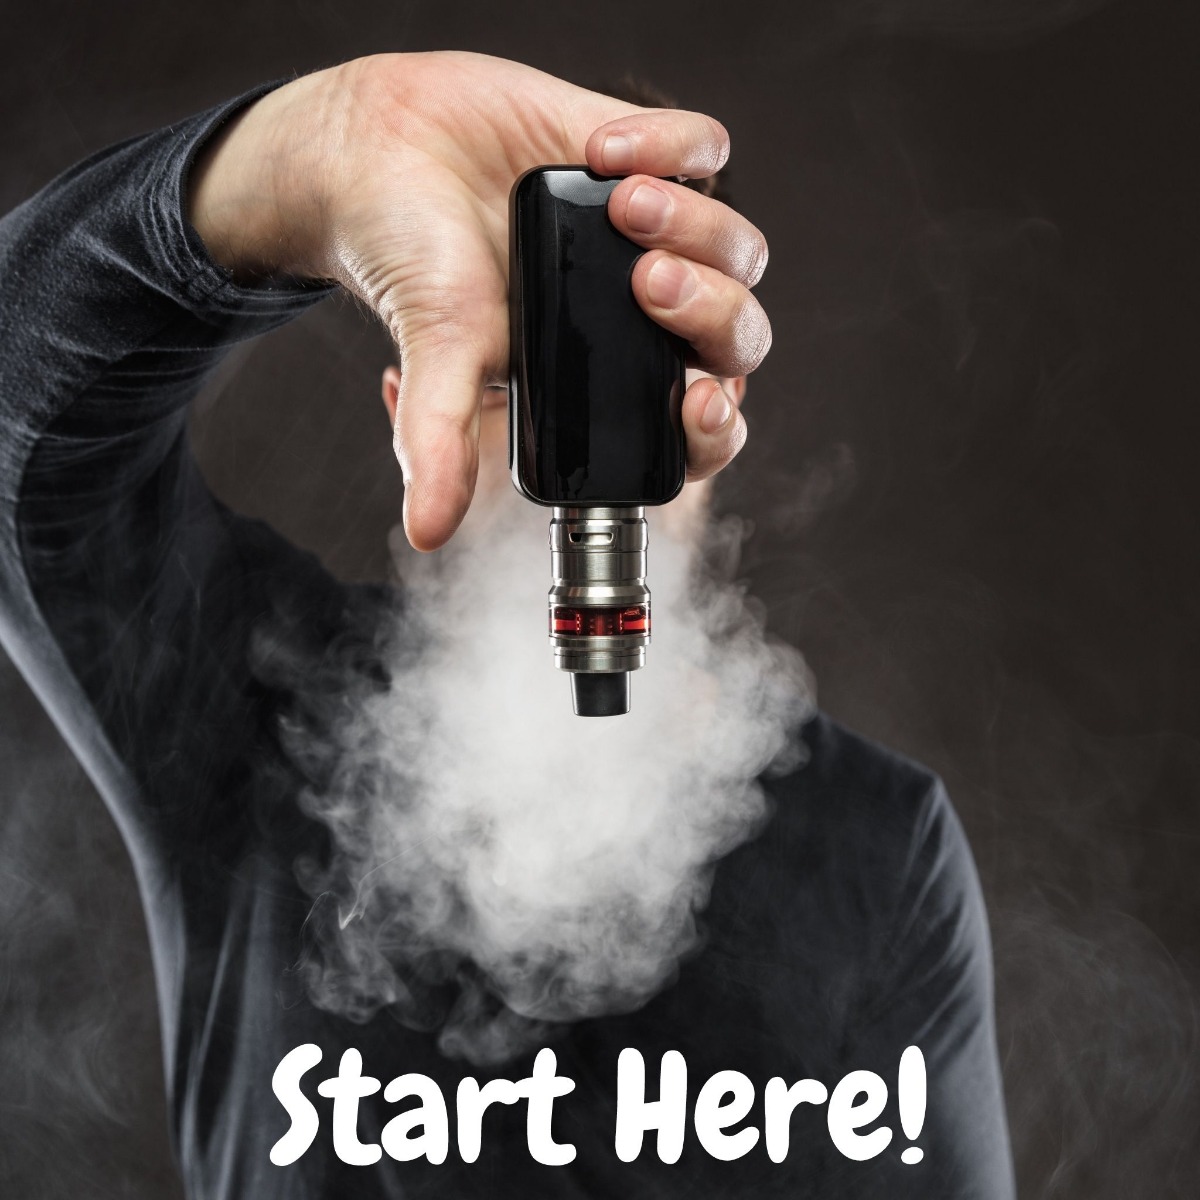 man holding vaporizer upside down with smoke coming out of his mouth and text saying start here